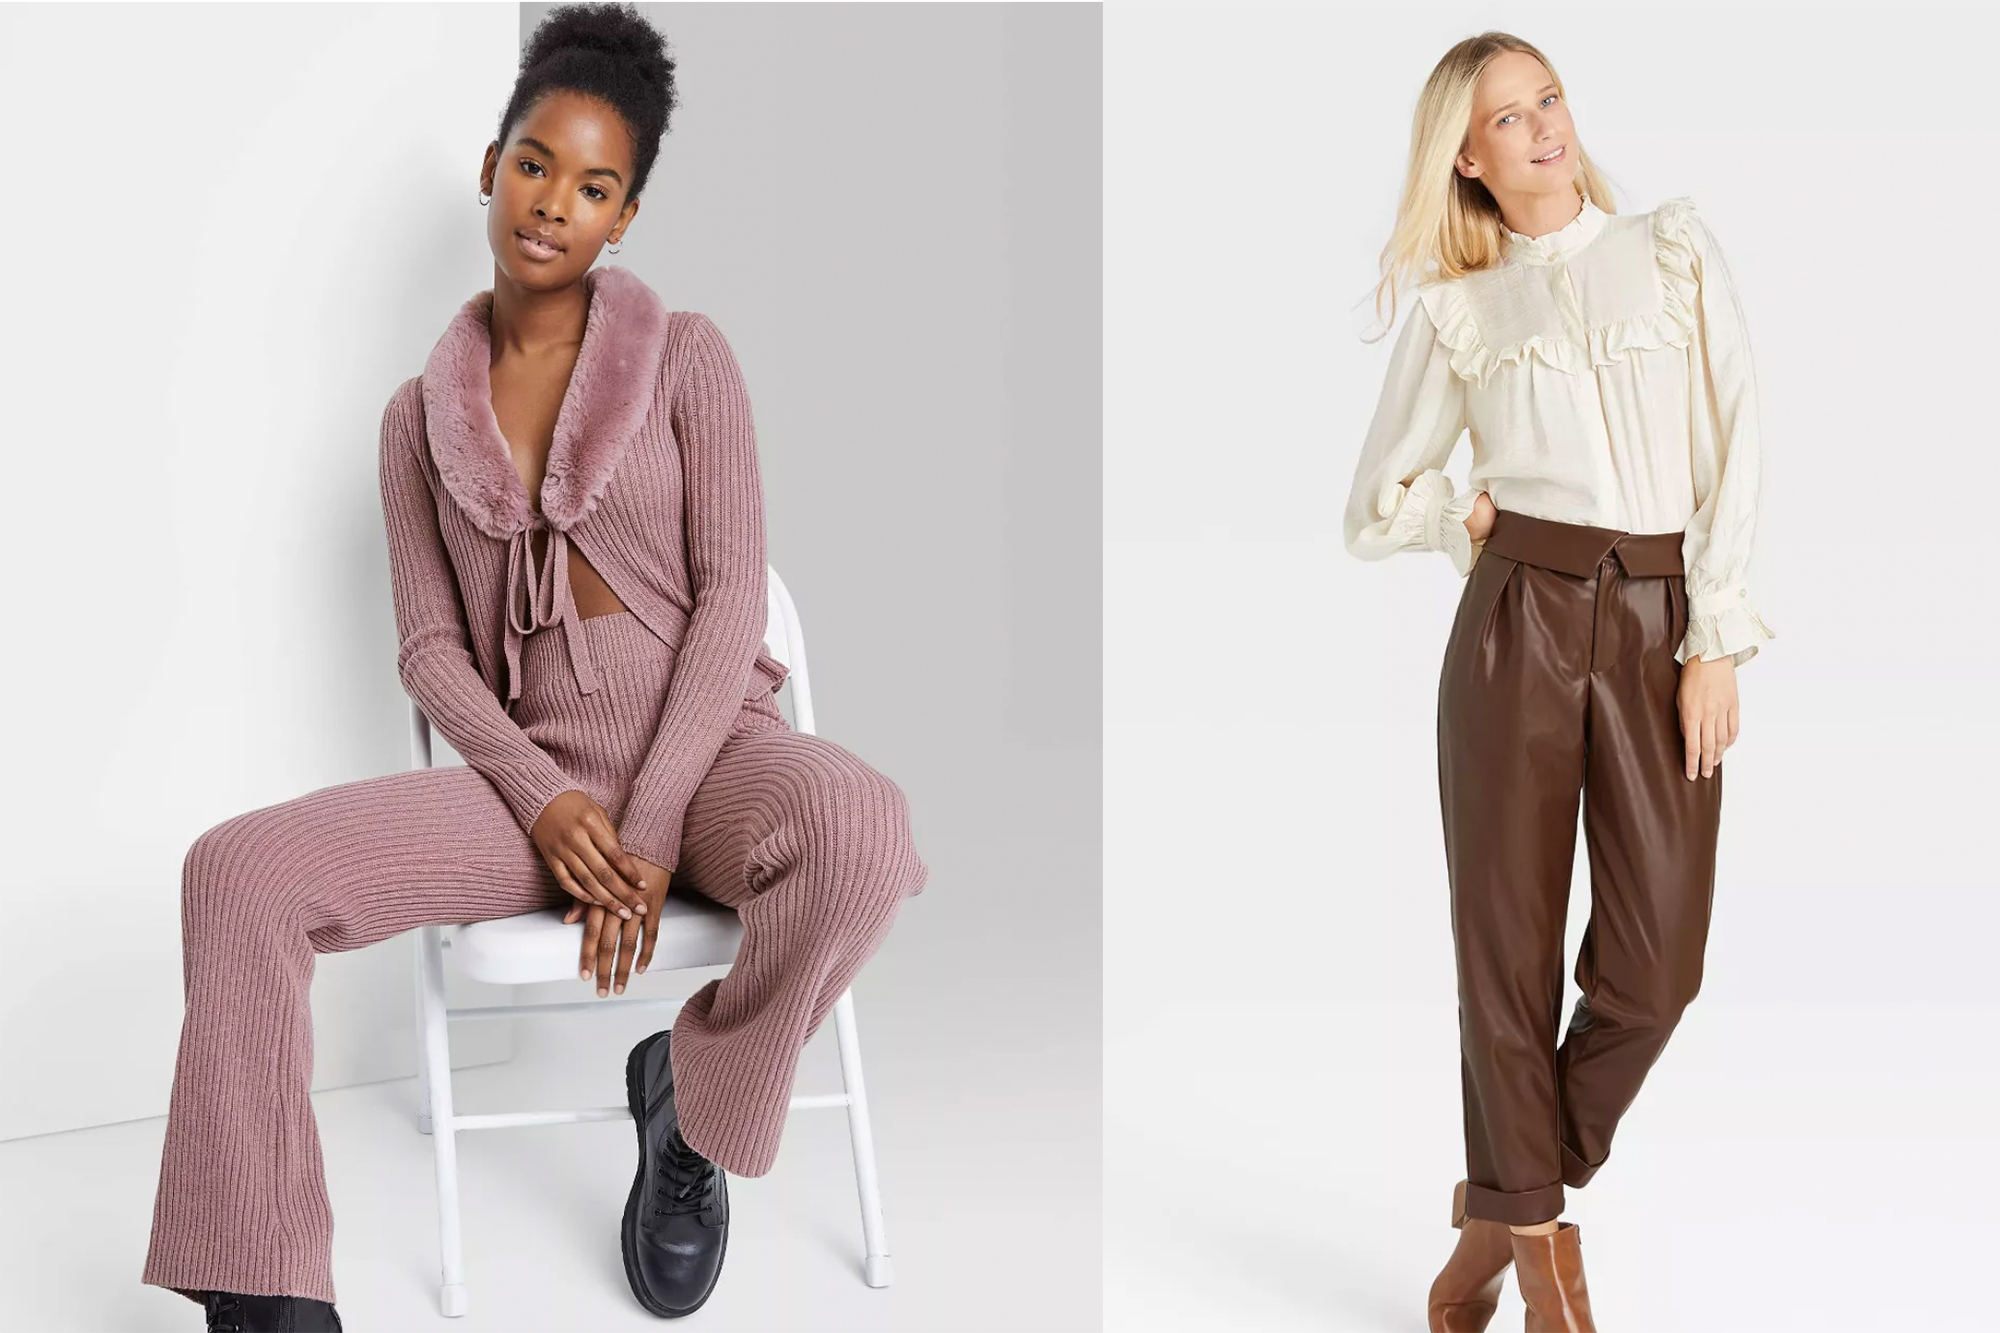 7 Seriously Trendy Fashion Finds We Discovered Hiding at Target